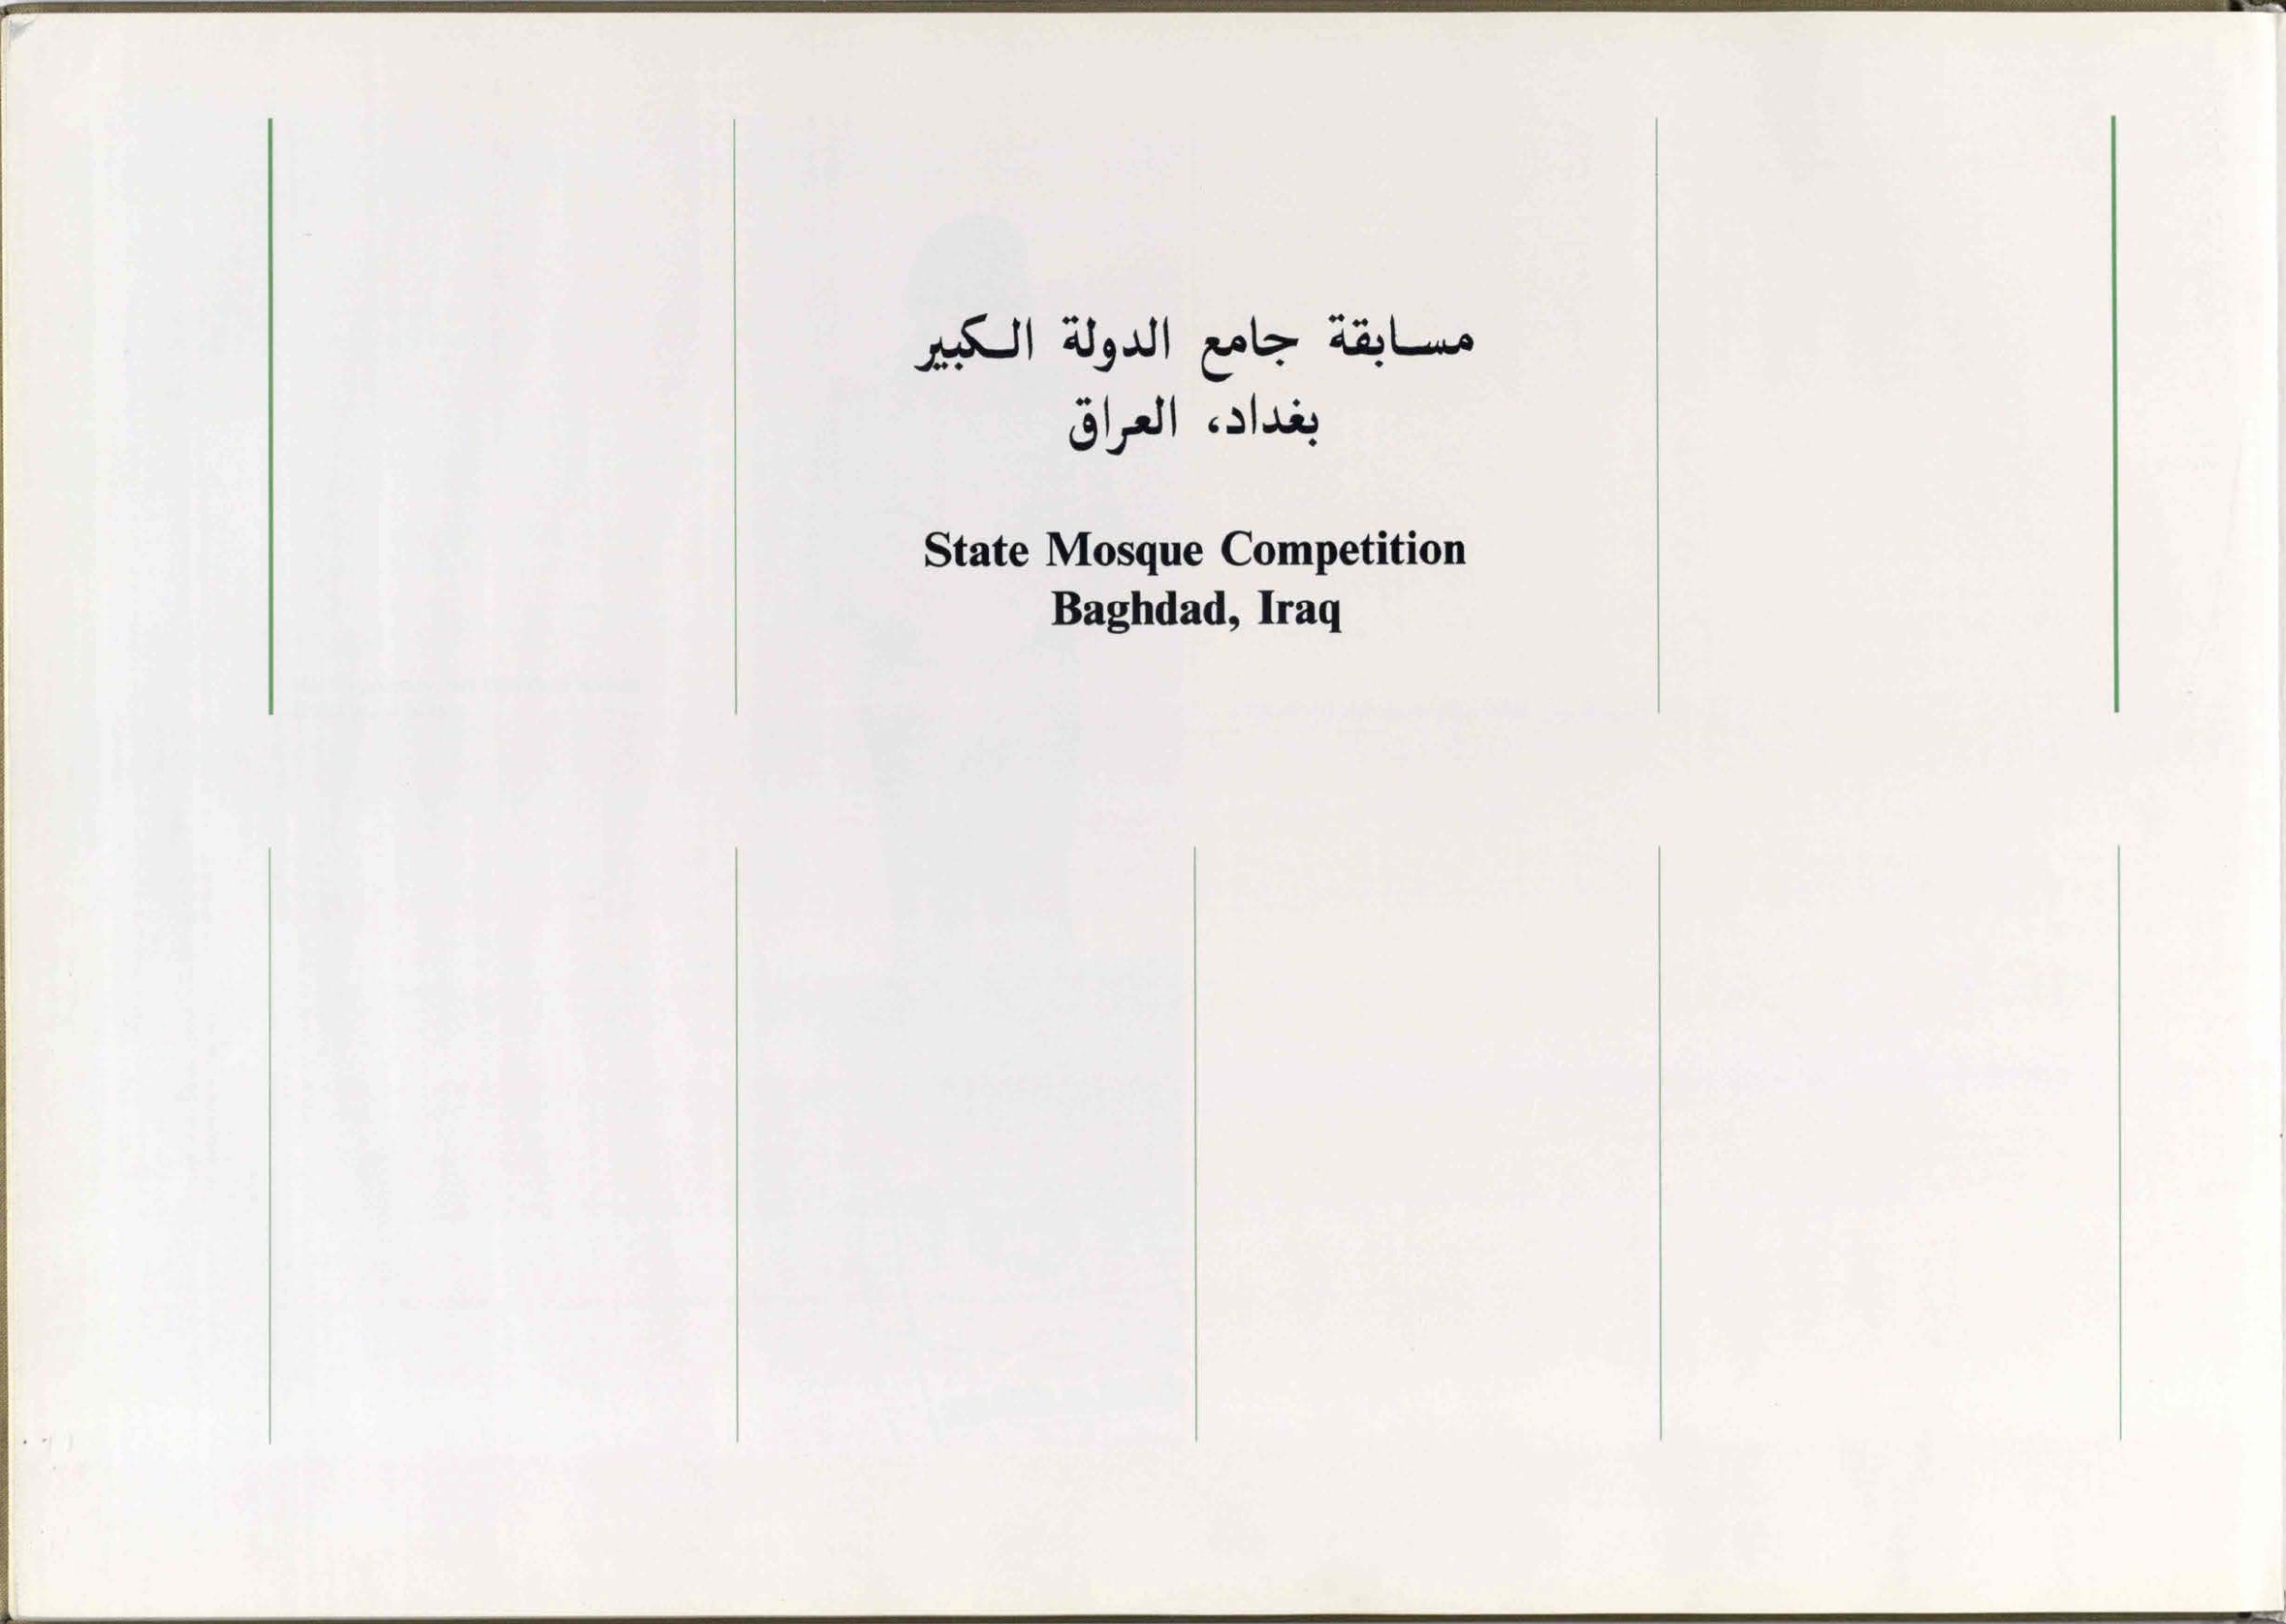 Baghdad State Mosque (Design) - A hardcover, folio-sized 88-page volume published by the government of Baghdad. The book documents the<span style="color: rgb(1, 1, 1); line-height: 16px;">&nbsp;1982-1983 competition to design a State Mosque in Baghdad (project no. 651/328) and the proposals from the seven firms selected to submit designs to the competition.&nbsp;</span><span style="color: rgb(1, 1, 1); line-height: 16px;">The mosque was ultimately never built.</span><div><span style="color: rgb(1, 1, 1); line-height: 16px;"><br></span></div><div><span style="color: rgb(1, 1, 1); line-height: 16px;">The book contains an introduction and Brief to the competition; Design Philosophies and models, plans, and drawings from each of the seven firms; and curriculum vitaes for the firms or architects.<br></span><div><div><span style="color: rgb(1, 1, 1); line-height: 16px;"><br></span></div></div></div><div><span style="color: rgb(1, 1, 1); line-height: 16px;">The text is in both English and Arabic. The pages in this pdf file on Archnet have been arranged to be read more easily in English, and do not appear in the original order as in the text. If you would like to view the original text, or read it in Arabic, please access the record for the&nbsp;</span><a href="https://www.archnet.org/publications/10397/" target="_blank" data-bypass="true">original text</a><span style="color: rgb(1, 1, 1); line-height: 16px;">.</span></div>